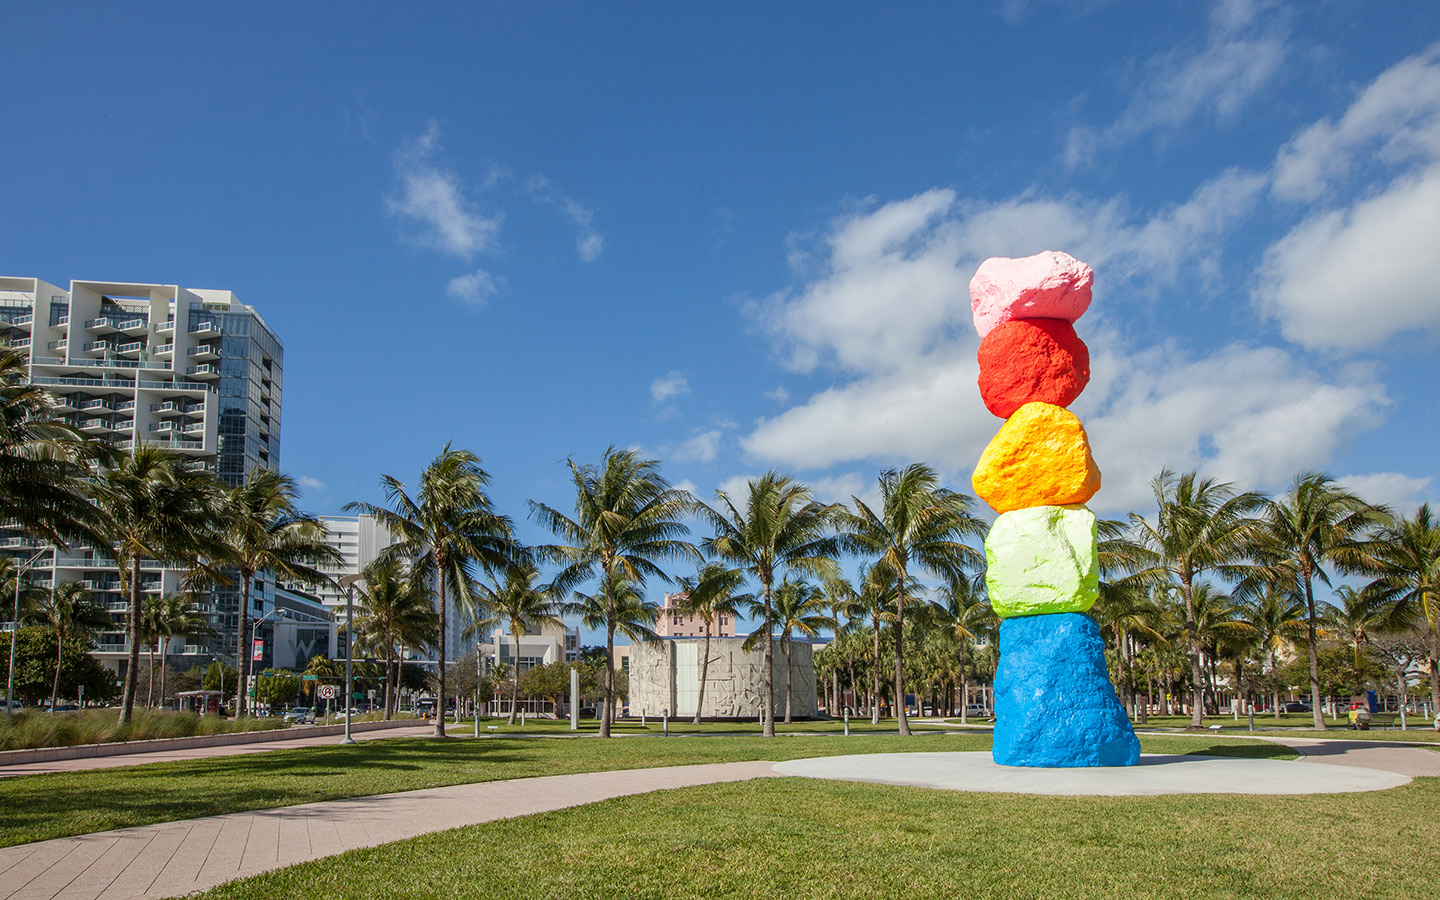 Ugo Rondione's Miami Mountain on the lawn of the Bass Museum